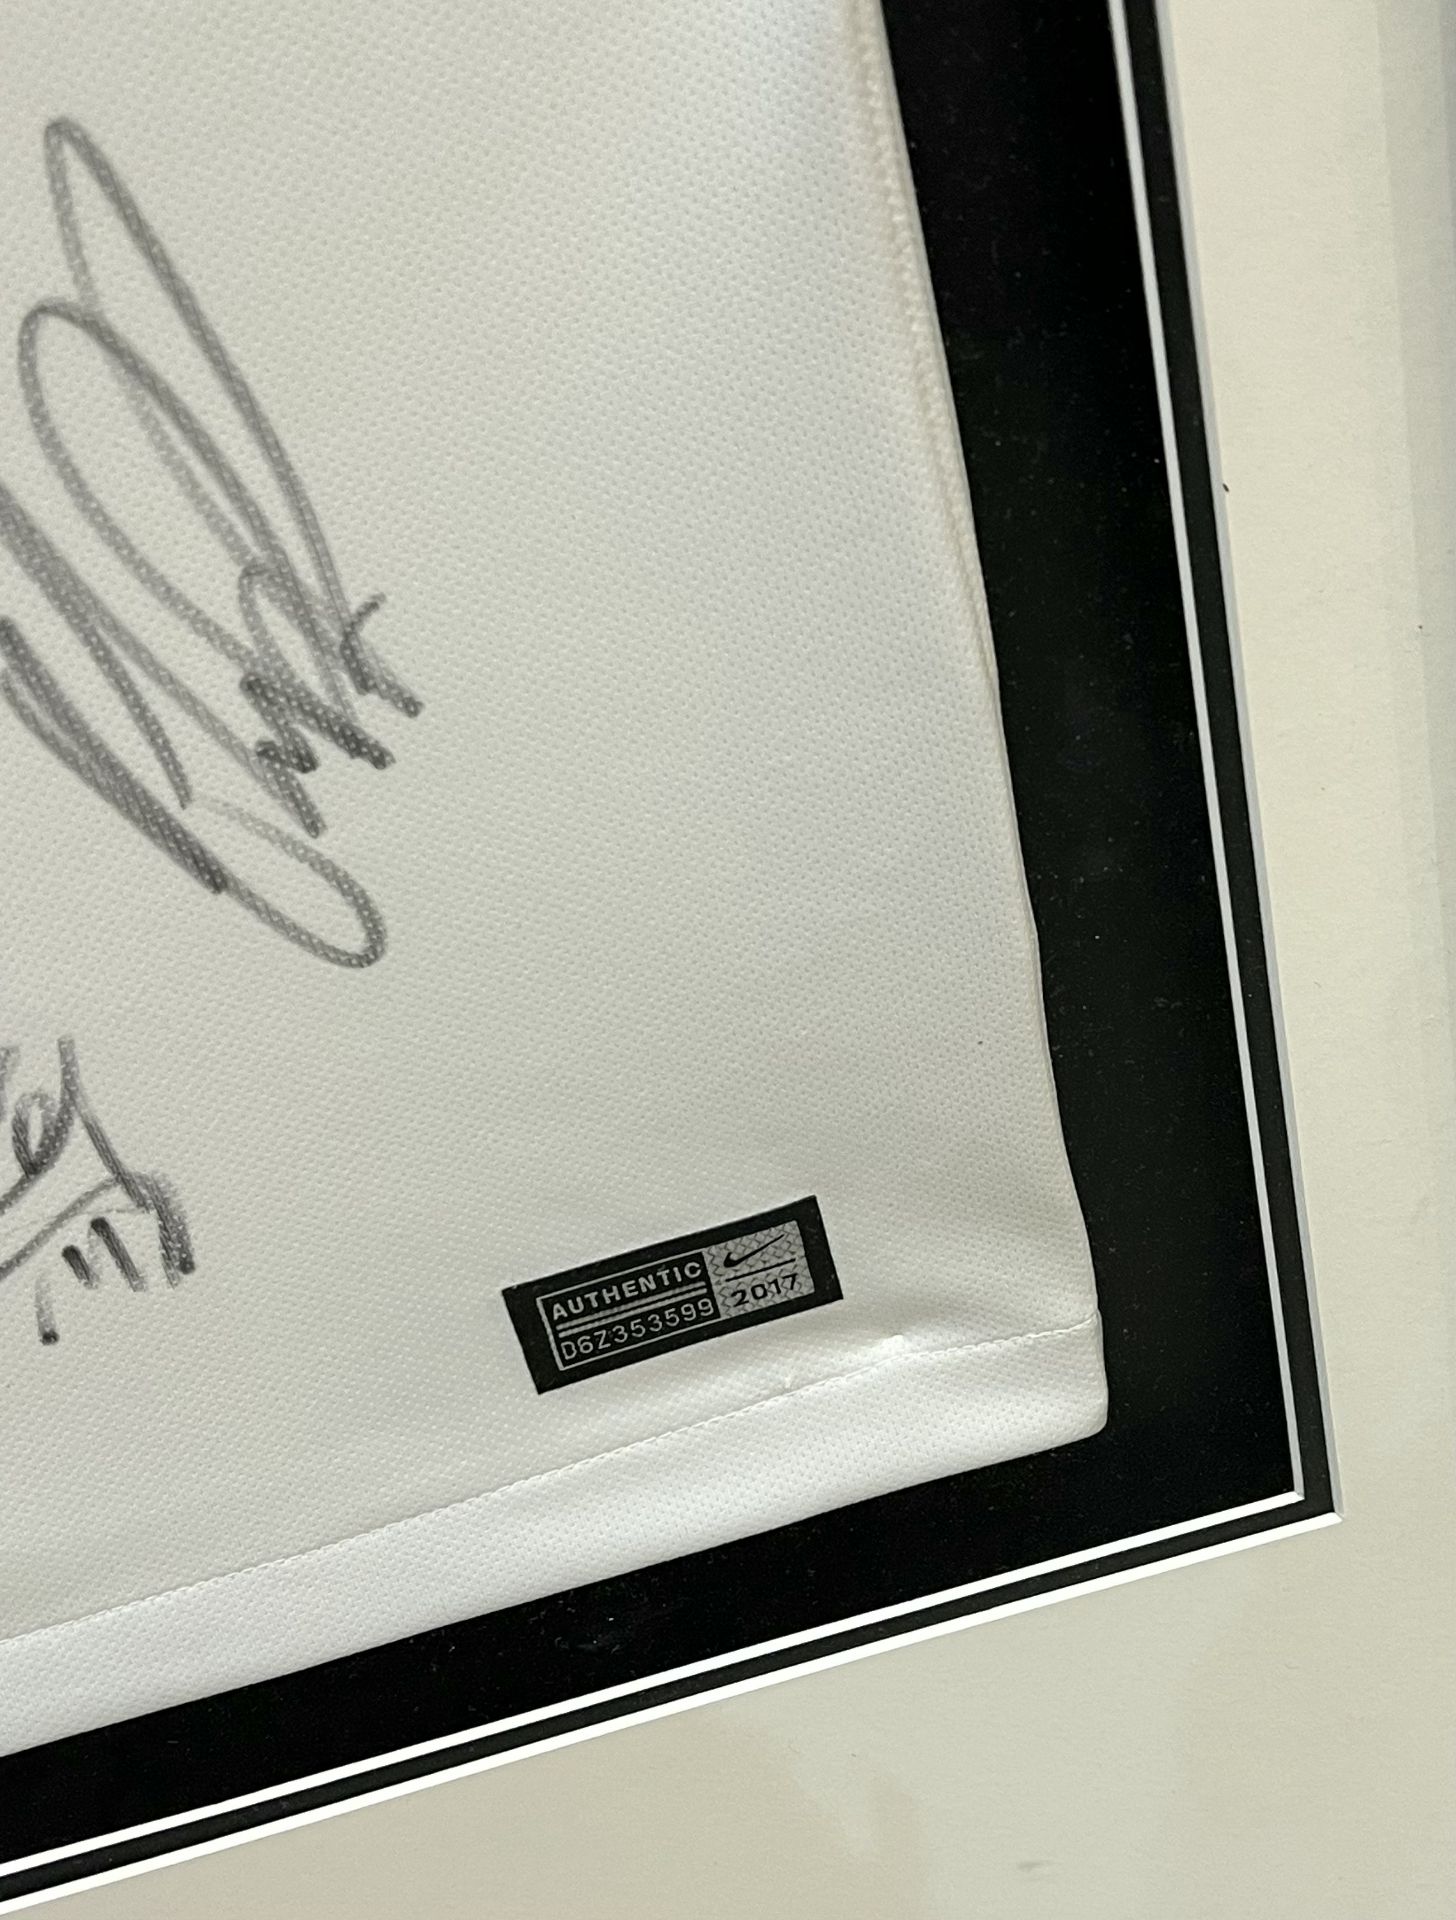 Authentic Tottenham Hotspur hand signed shirt display from the season 2017-18. The 17 signatories - Image 6 of 12